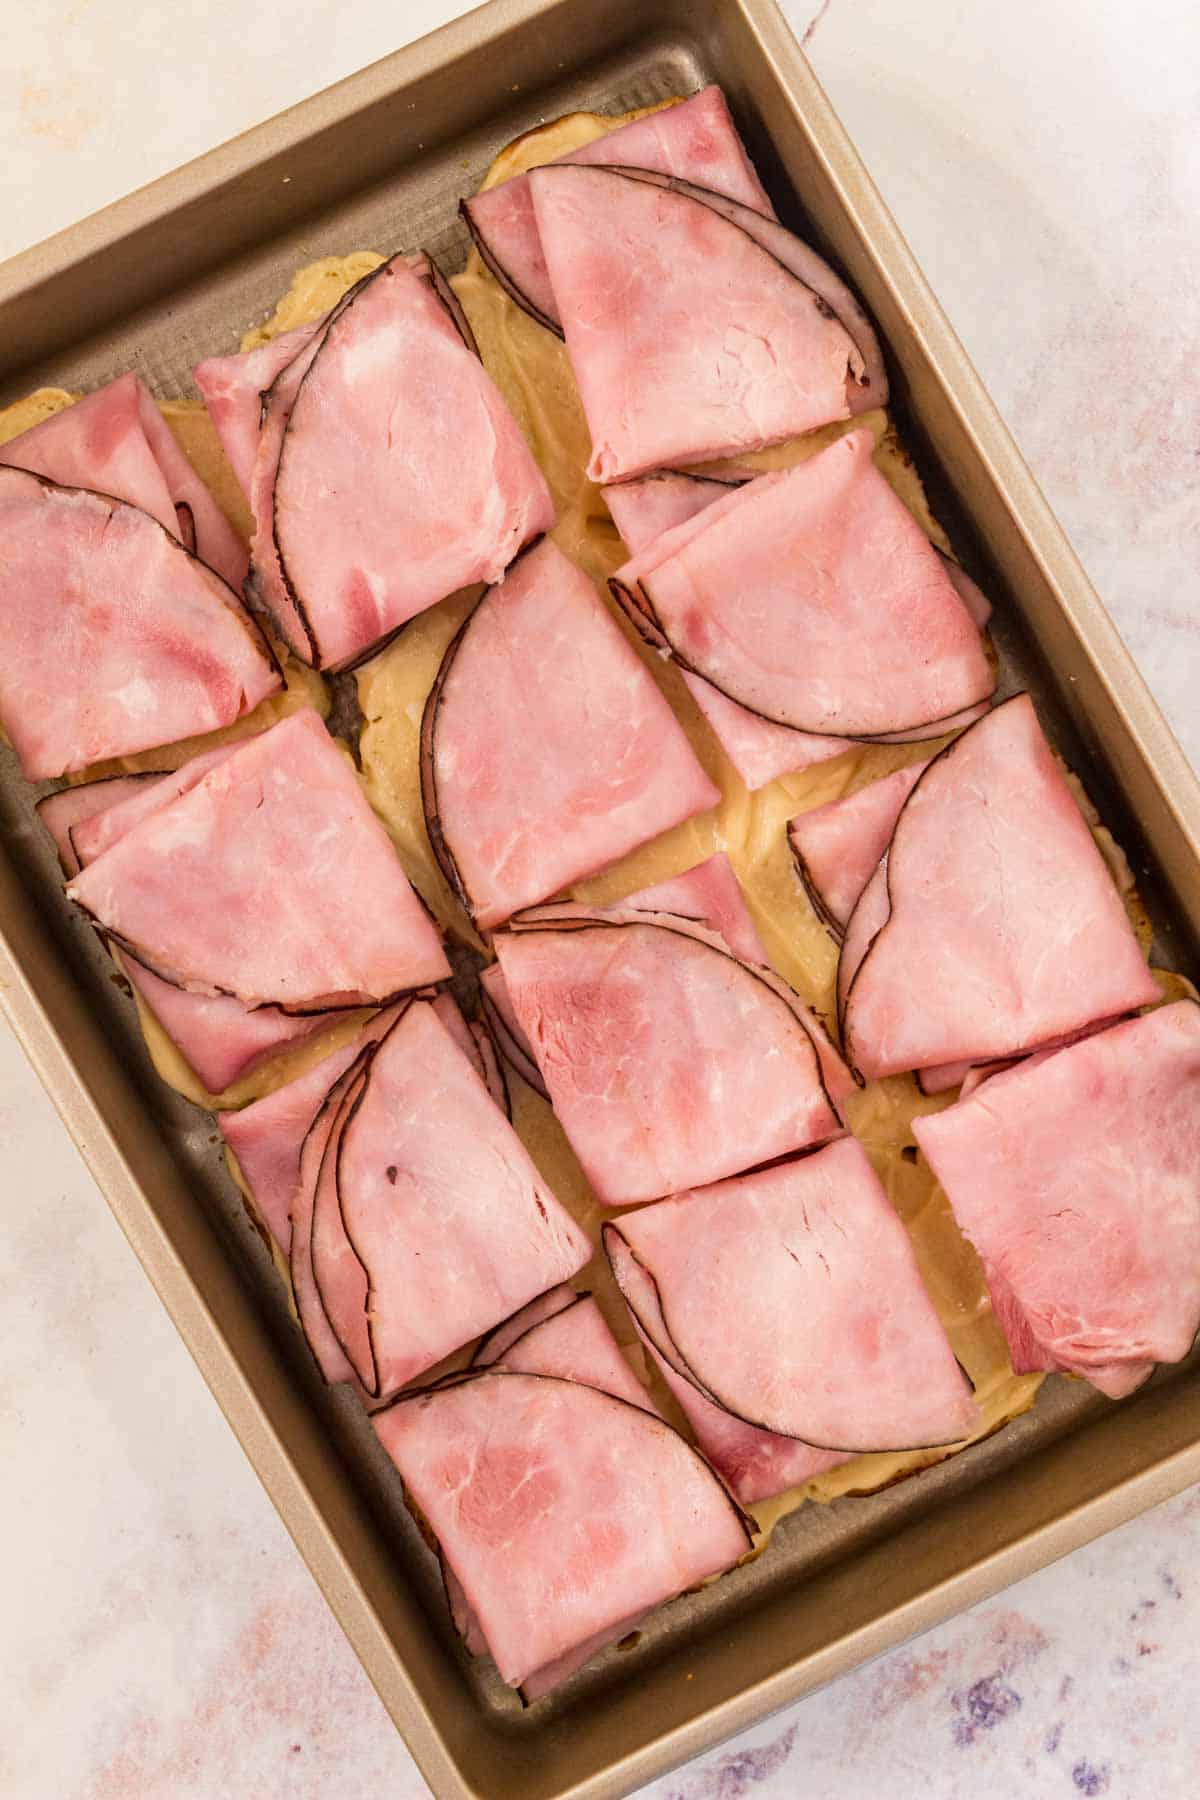 Slices of ham added to a pan full of Hawaiian rolls.